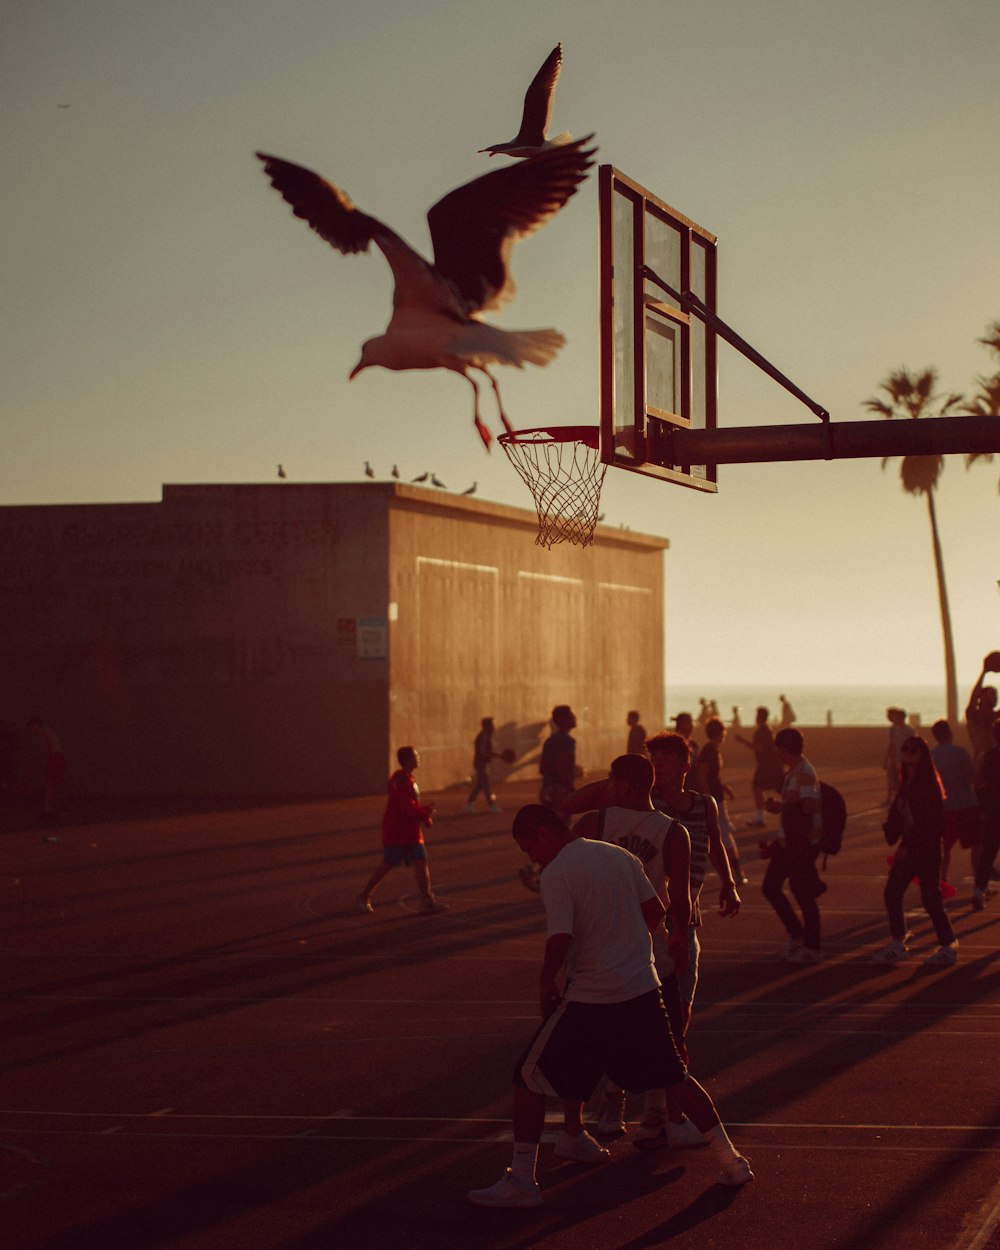 people playing basketball during golden hour